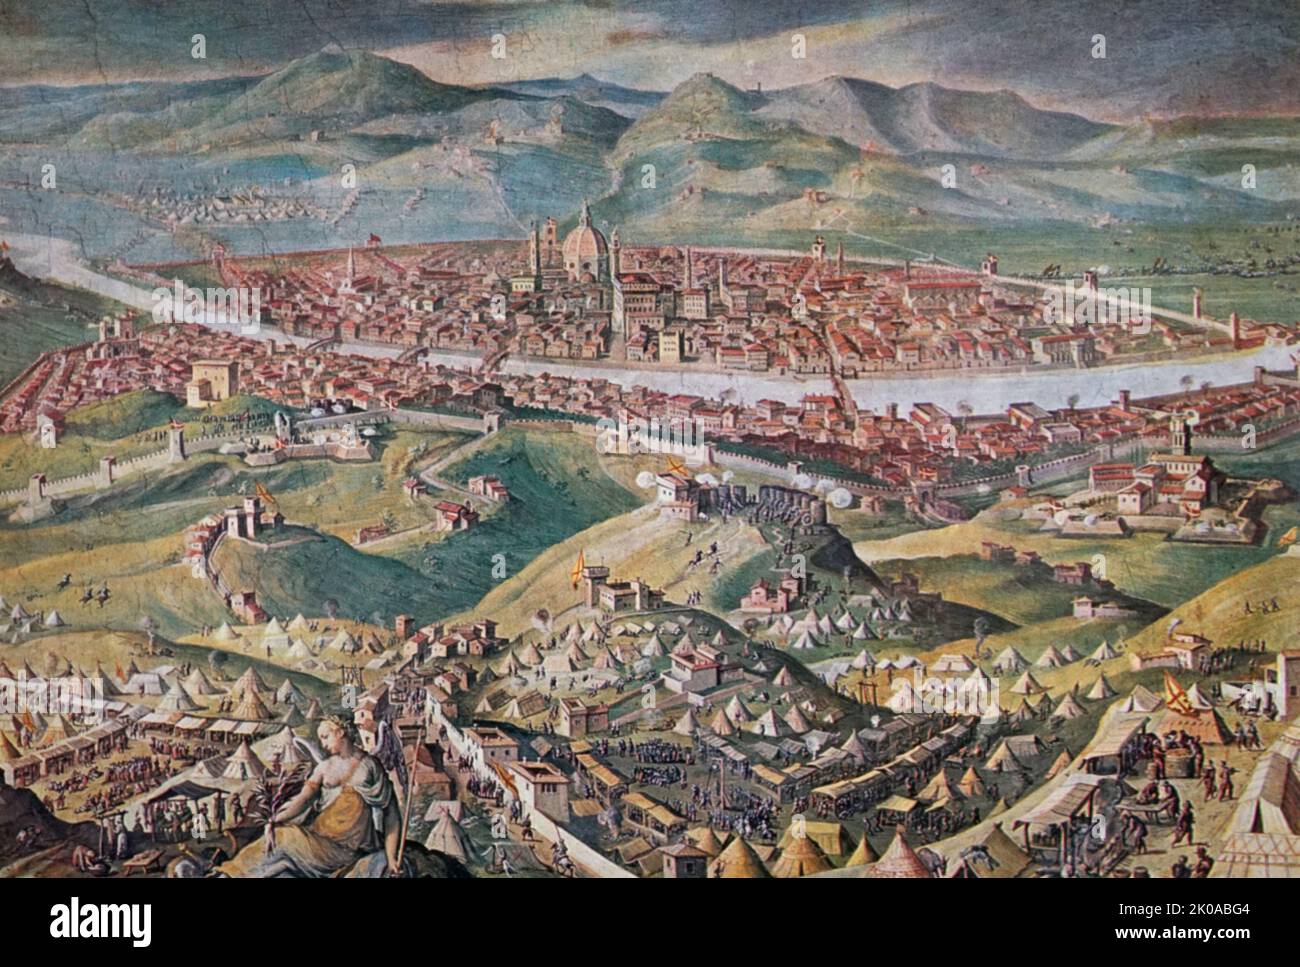 Florence besieged. A panorama by Vasari, showing how the republic was finally crushed in 1530. Giorgio Vasari (30 July 1511 - 27 June 1574) was an Italian painter, architect, engineer, writer, and historian Stock Photo